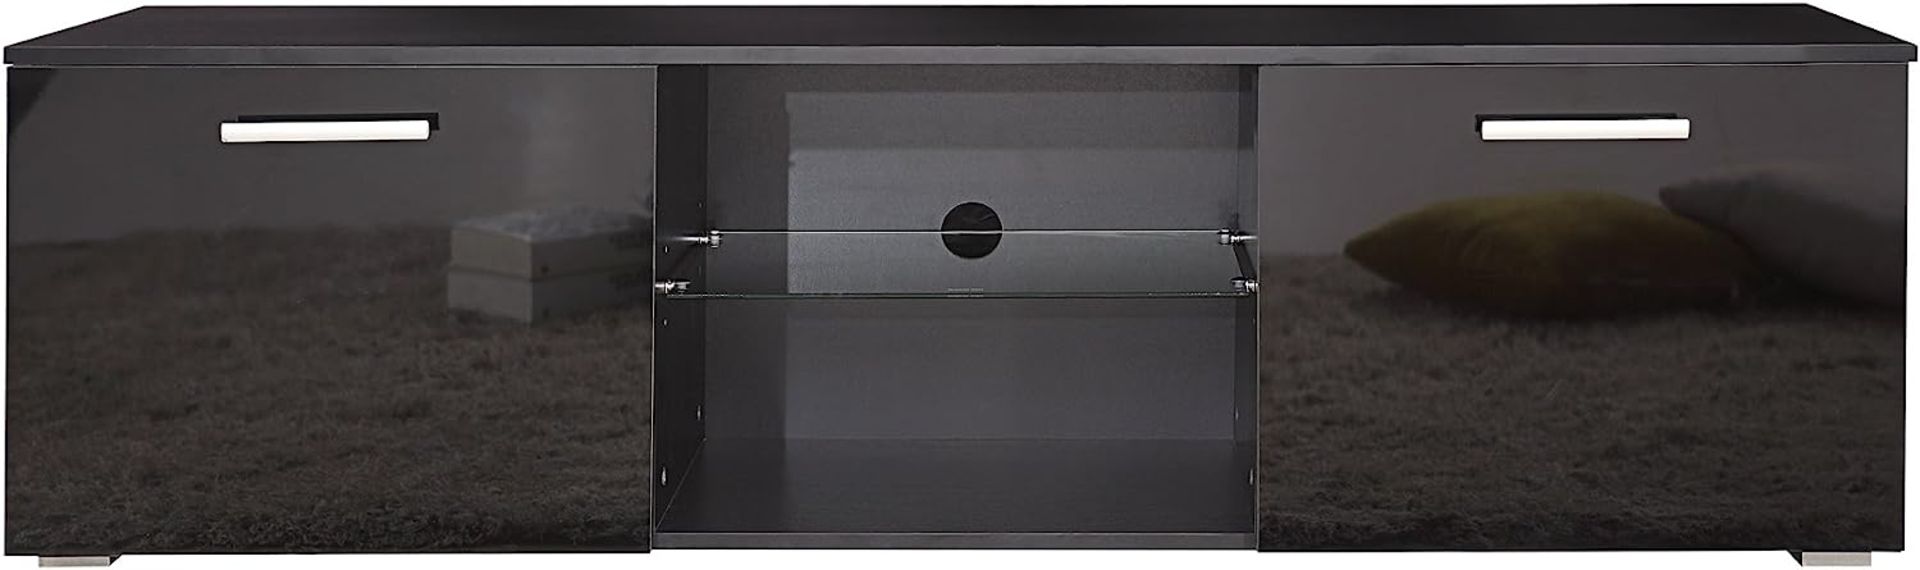 HARMIN MODERN 160CM TV STAND CABINET UNIT WITH HIGH GLOSS DOORS (BLACK ON BLACK) - Image 3 of 9